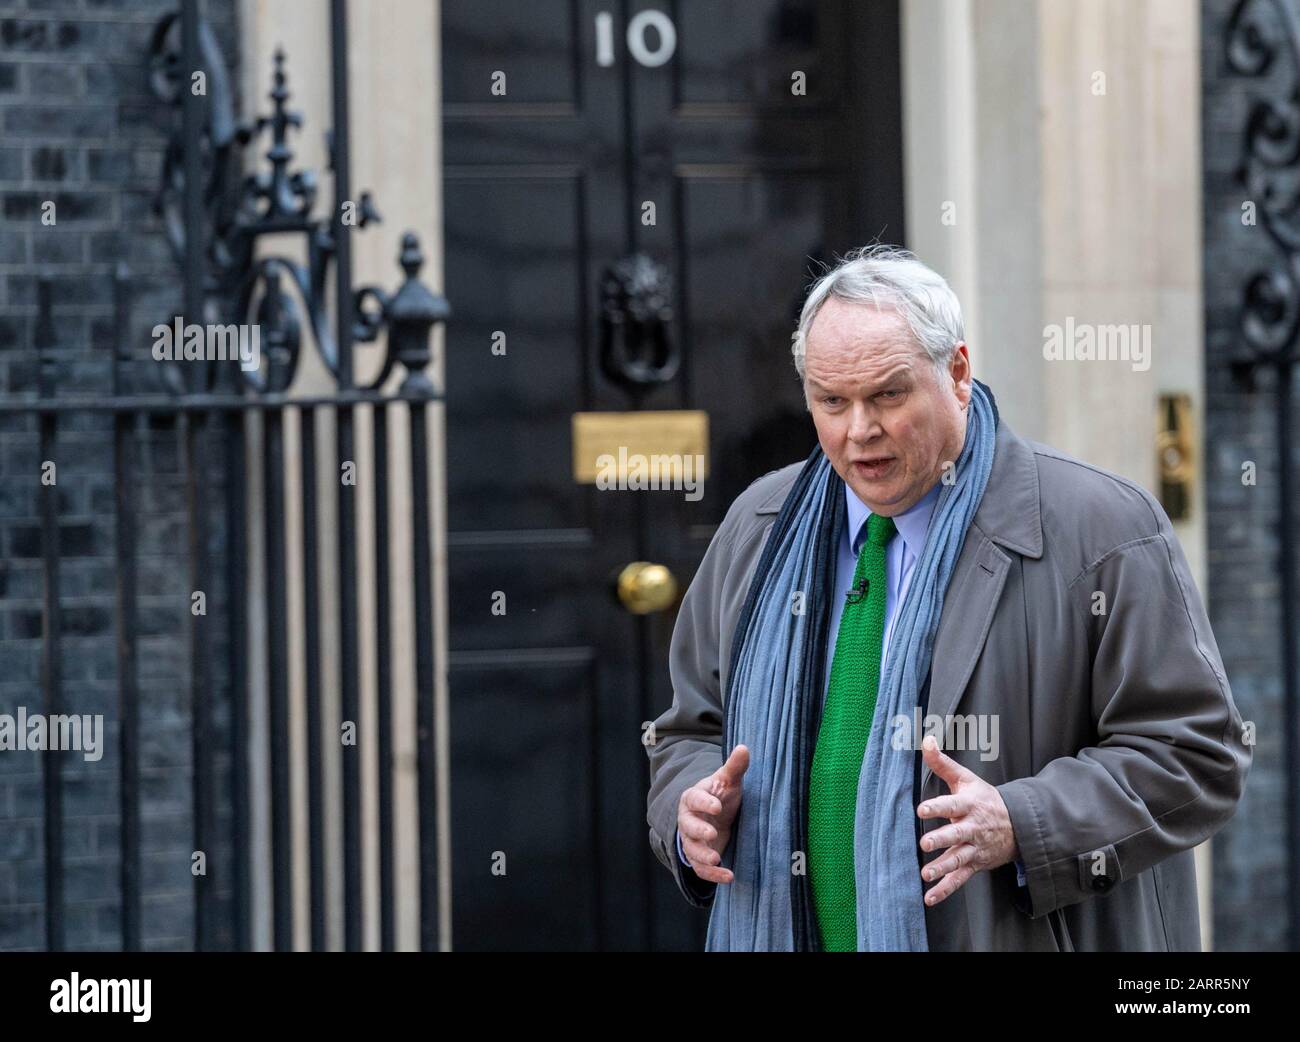 London, UK. 29th Jan, 2020. Adam Boulton, Editor at Large for Sky Television filming a program about Brexit outside 10 Downing Street, London Credit: Ian Davidson/Alamy Live News Stock Photo